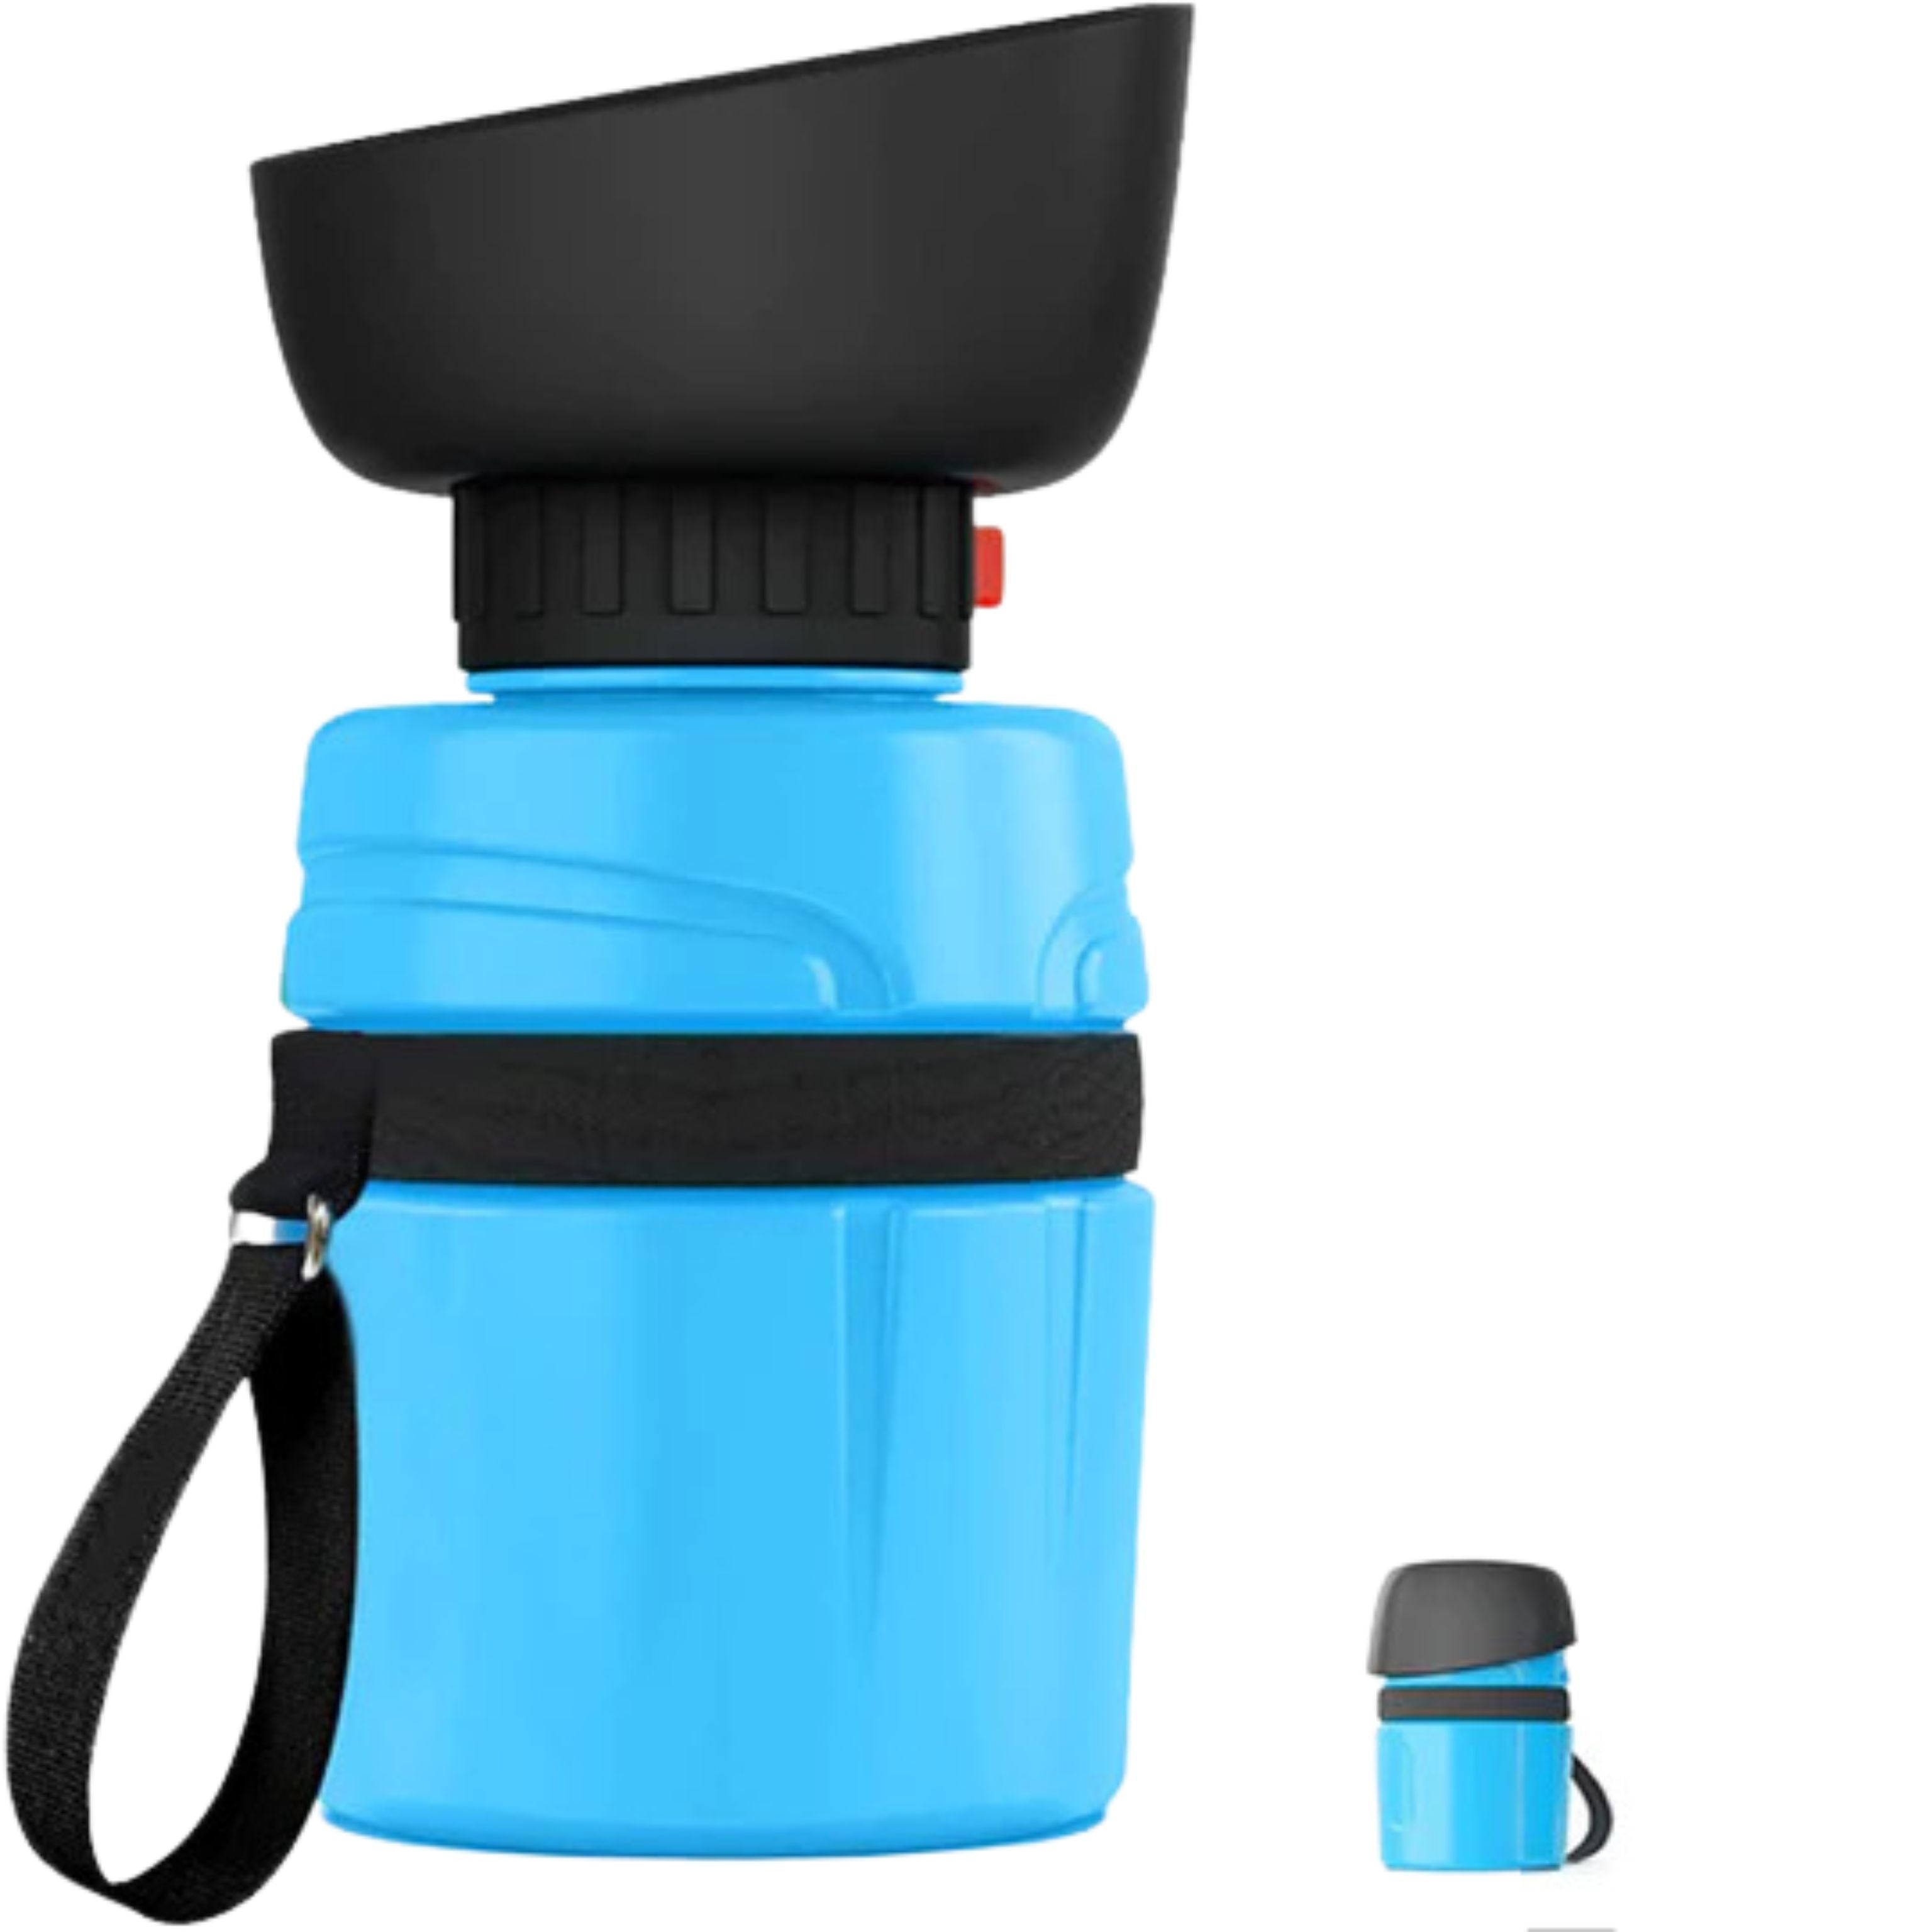 The Kana Dog Water Bottle |  Convenience On-The-Go